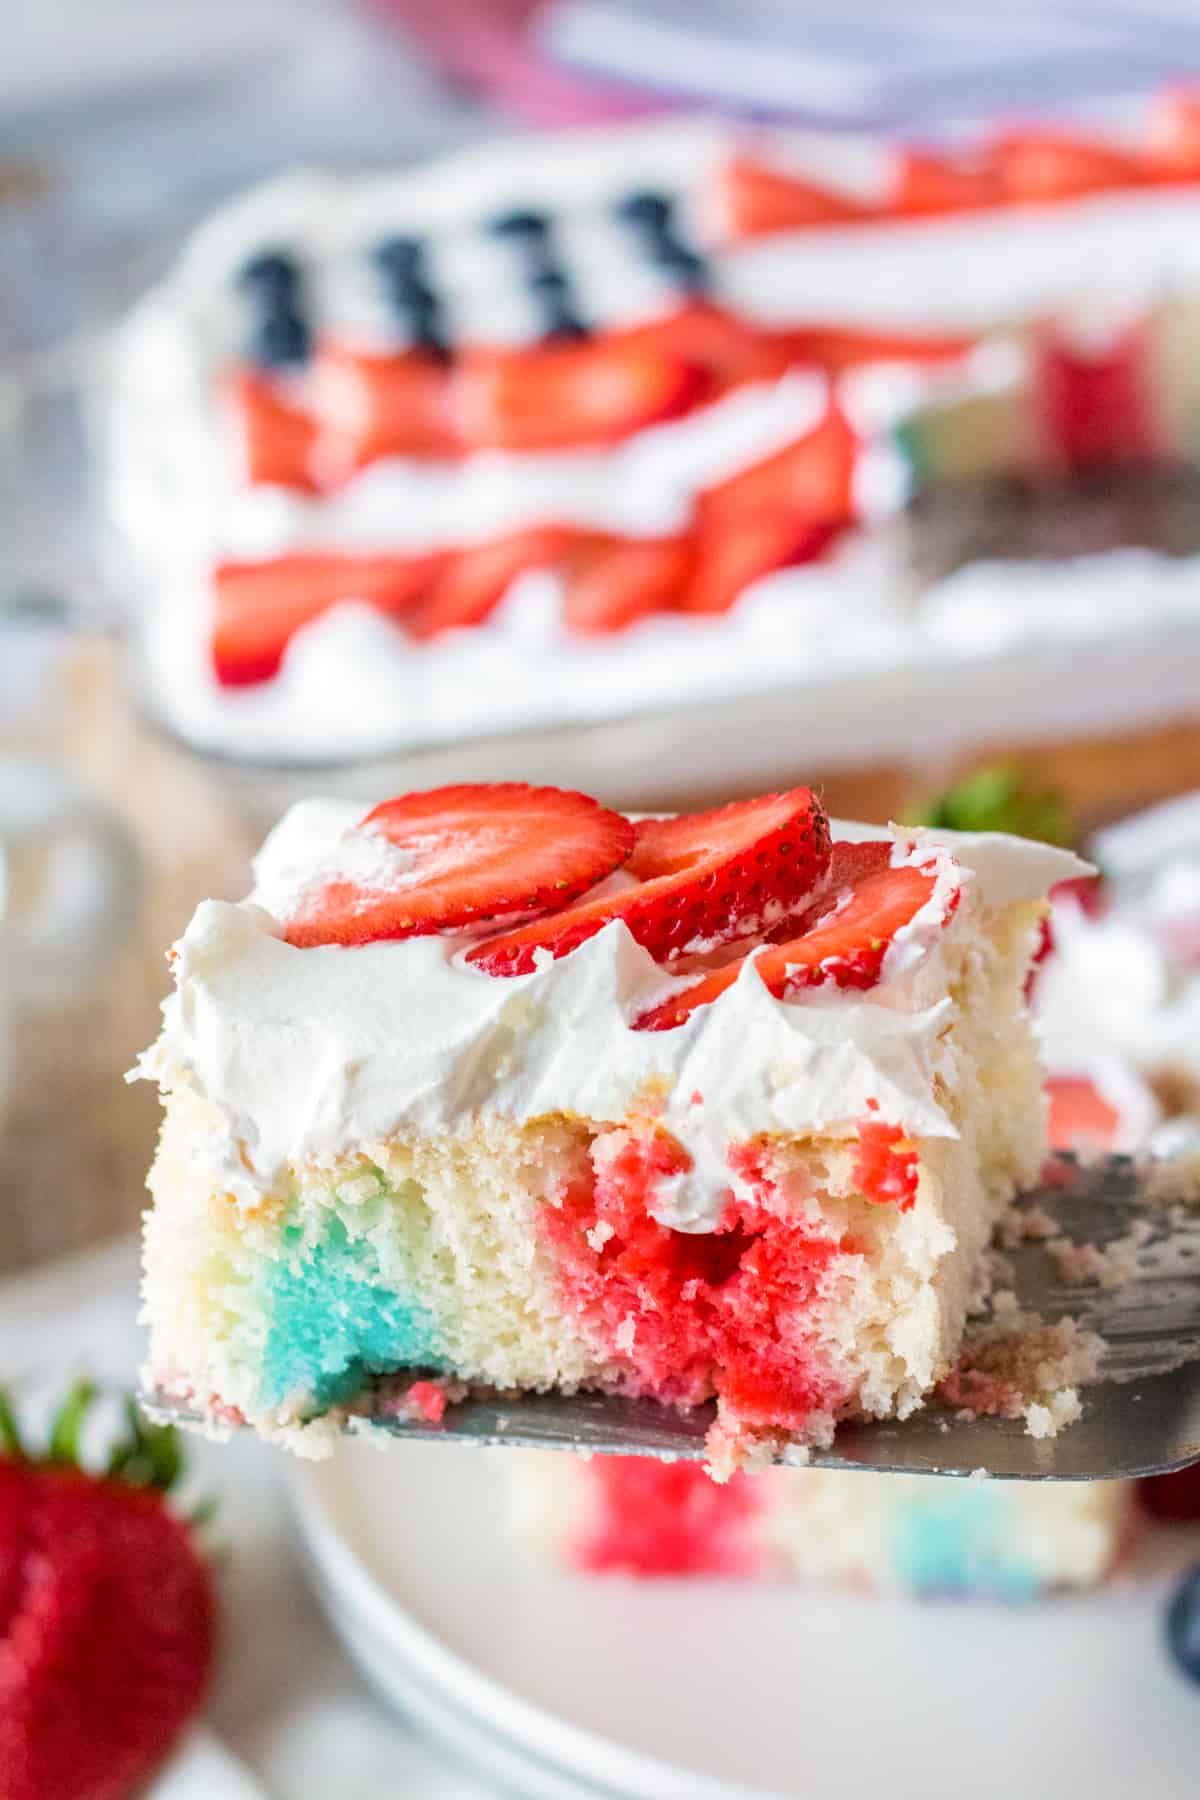 A piece of patriotic poke cake being lifted out of the cake to be served.